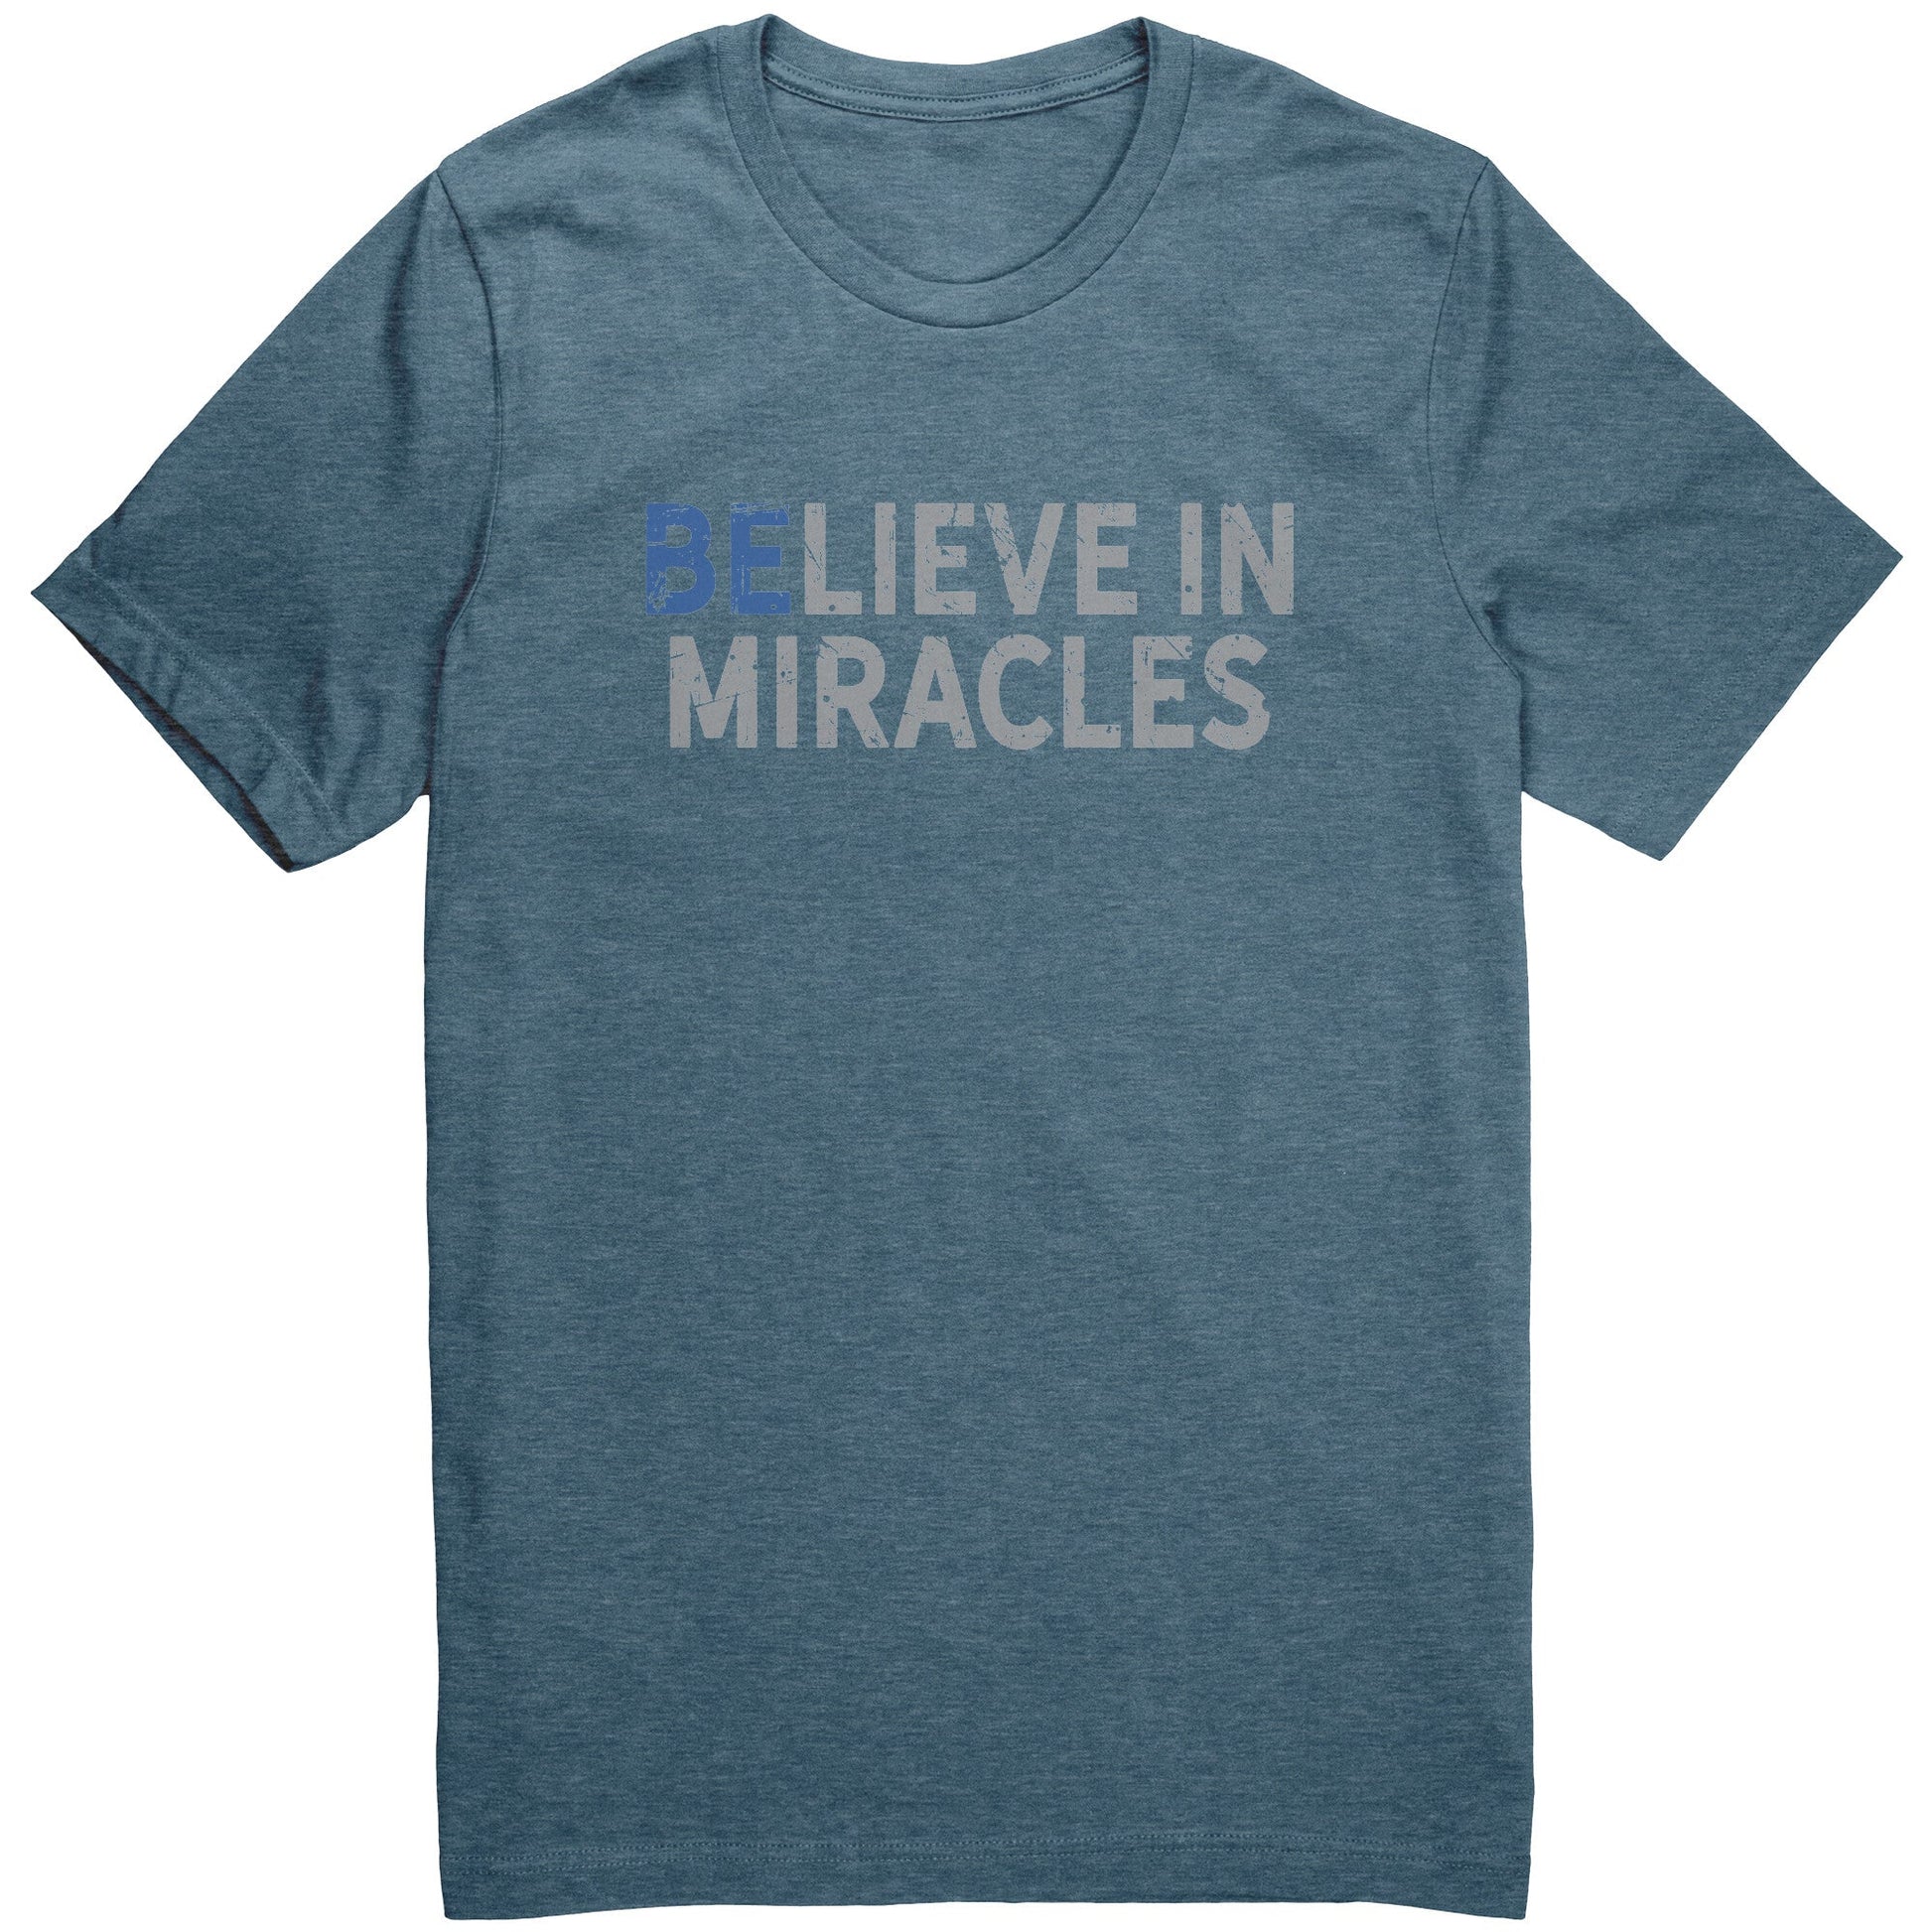 Believe in Miracles • Unisex T-shirt Apparel teelaunch Heather Deep Teal XS 